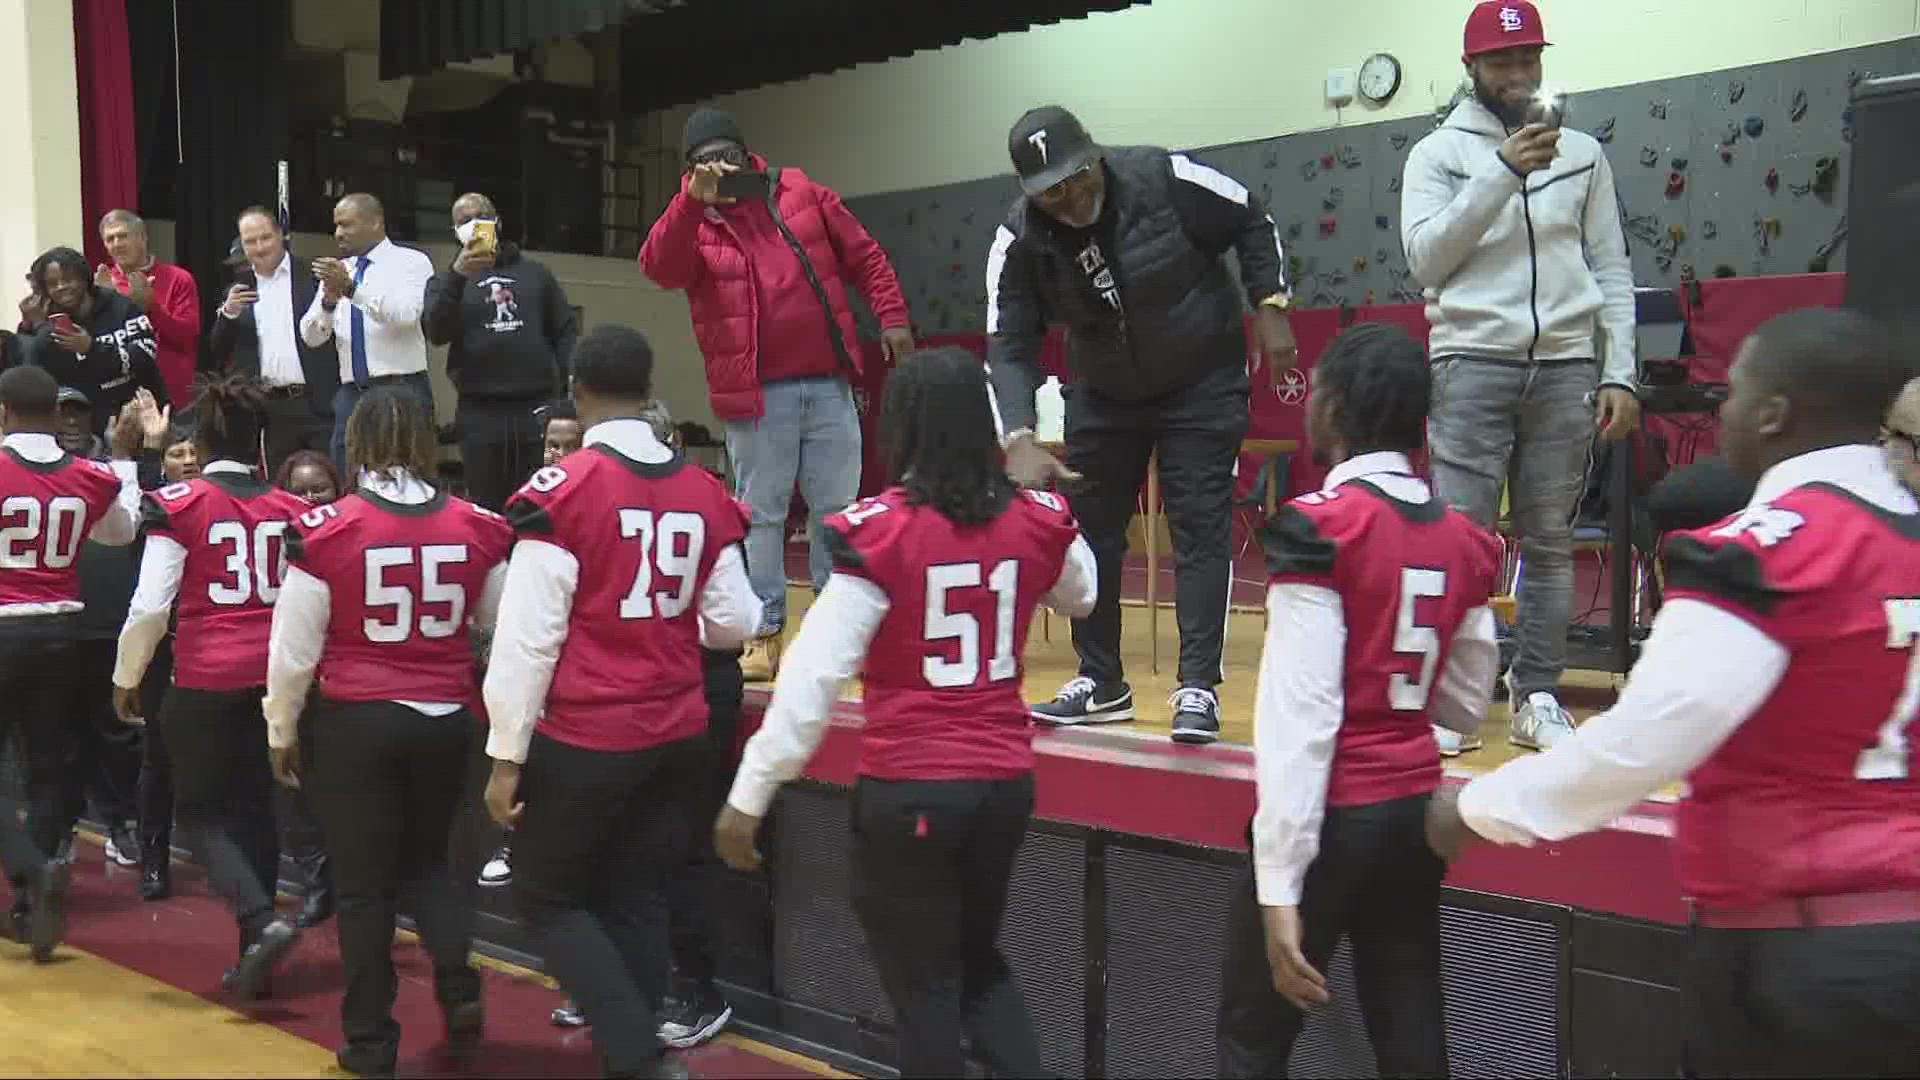 The City of Cleveland has announced a parade for the Glenville High School football team following its first-ever state championship.